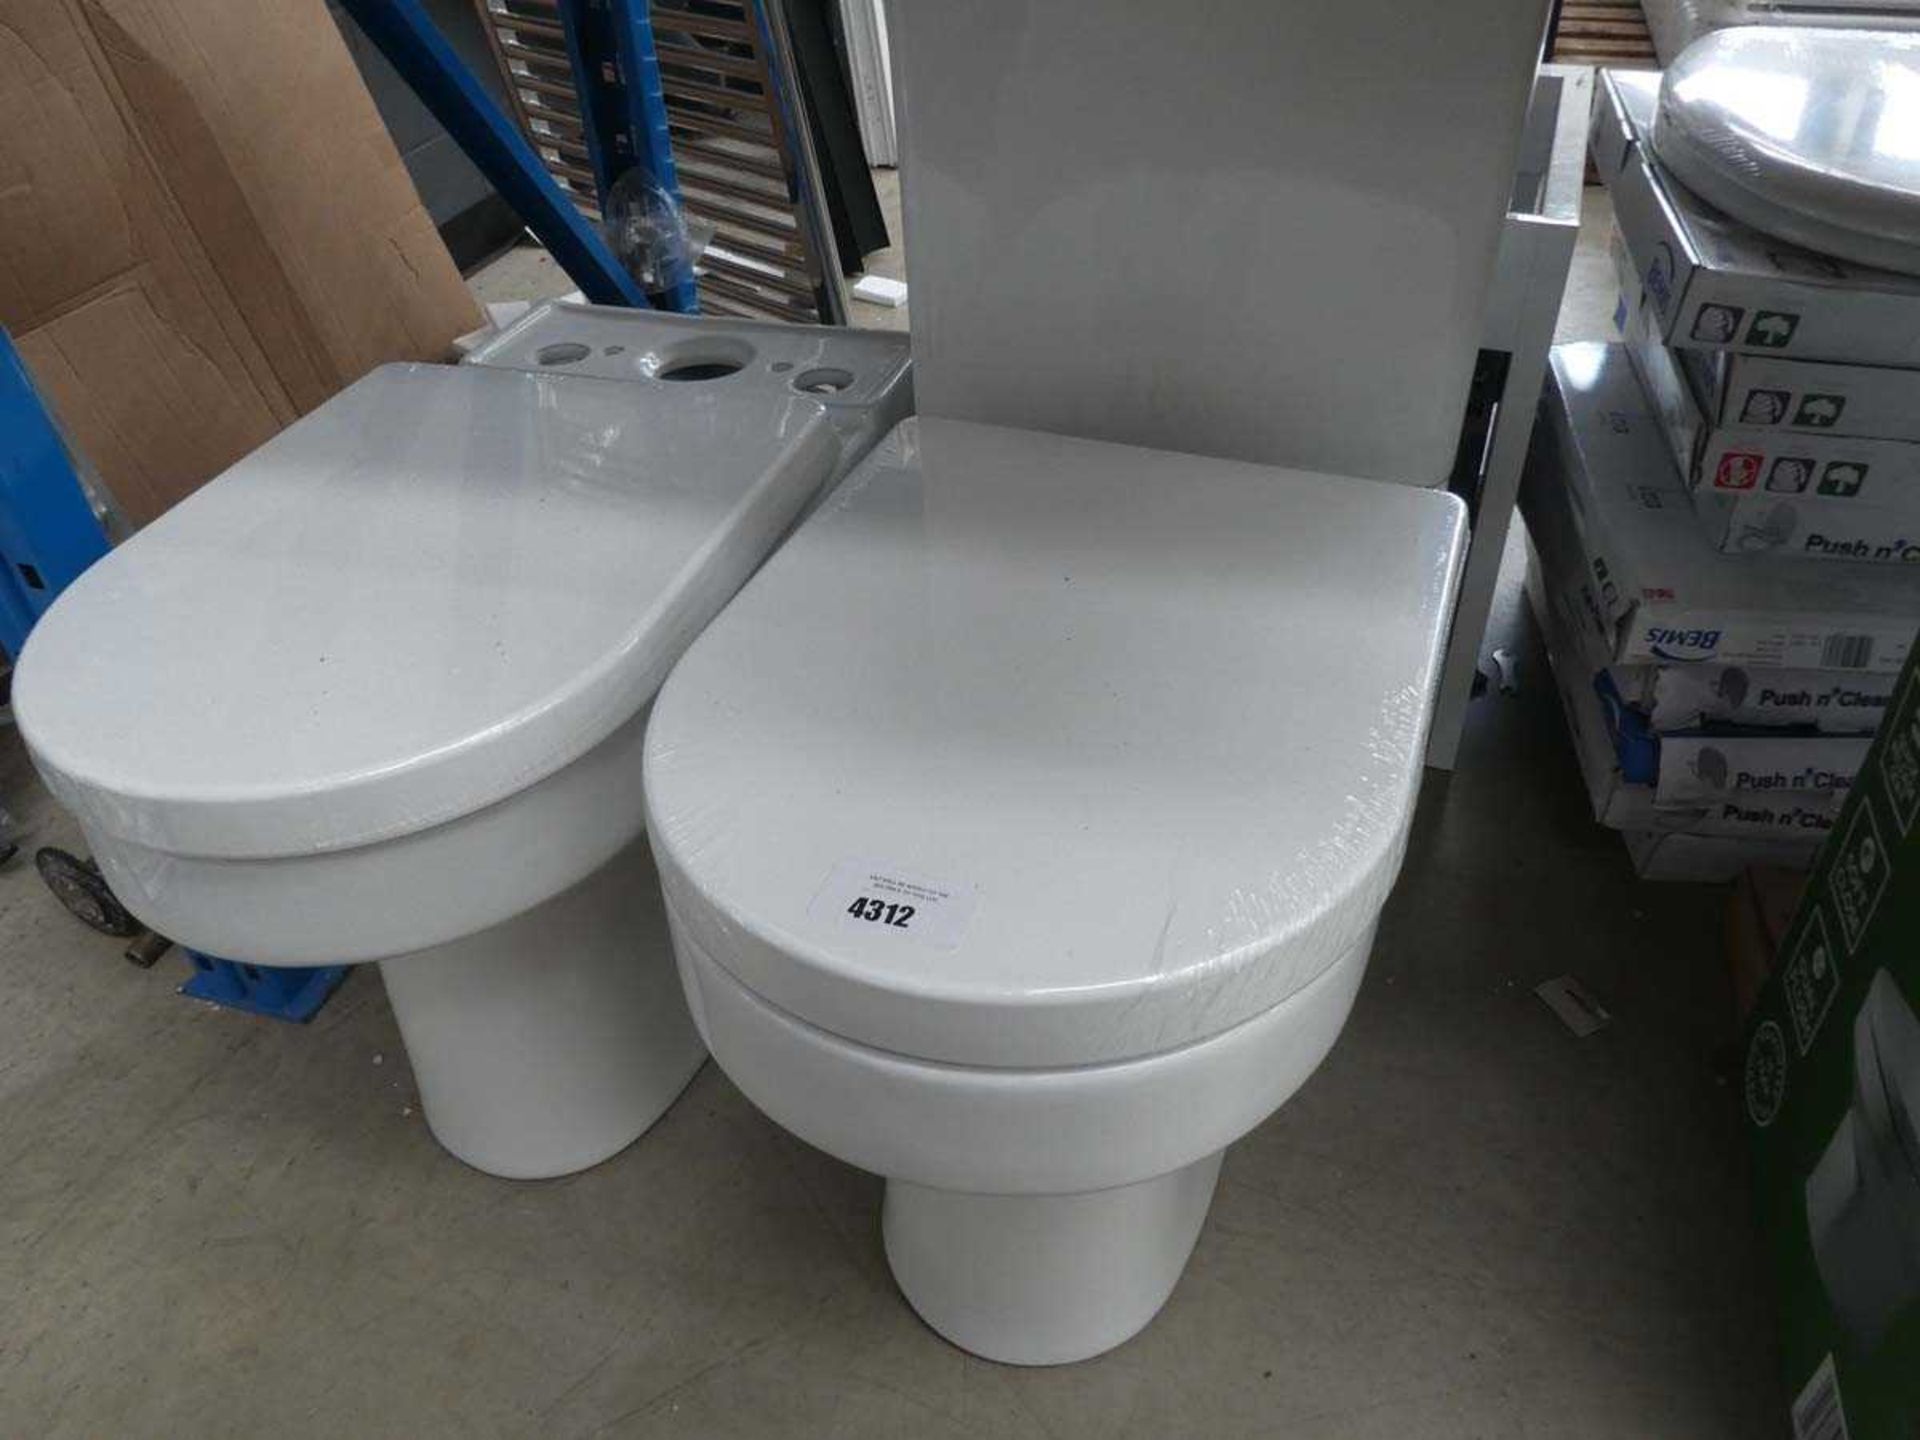 +VAT 2 toilet pans and system with cracked top